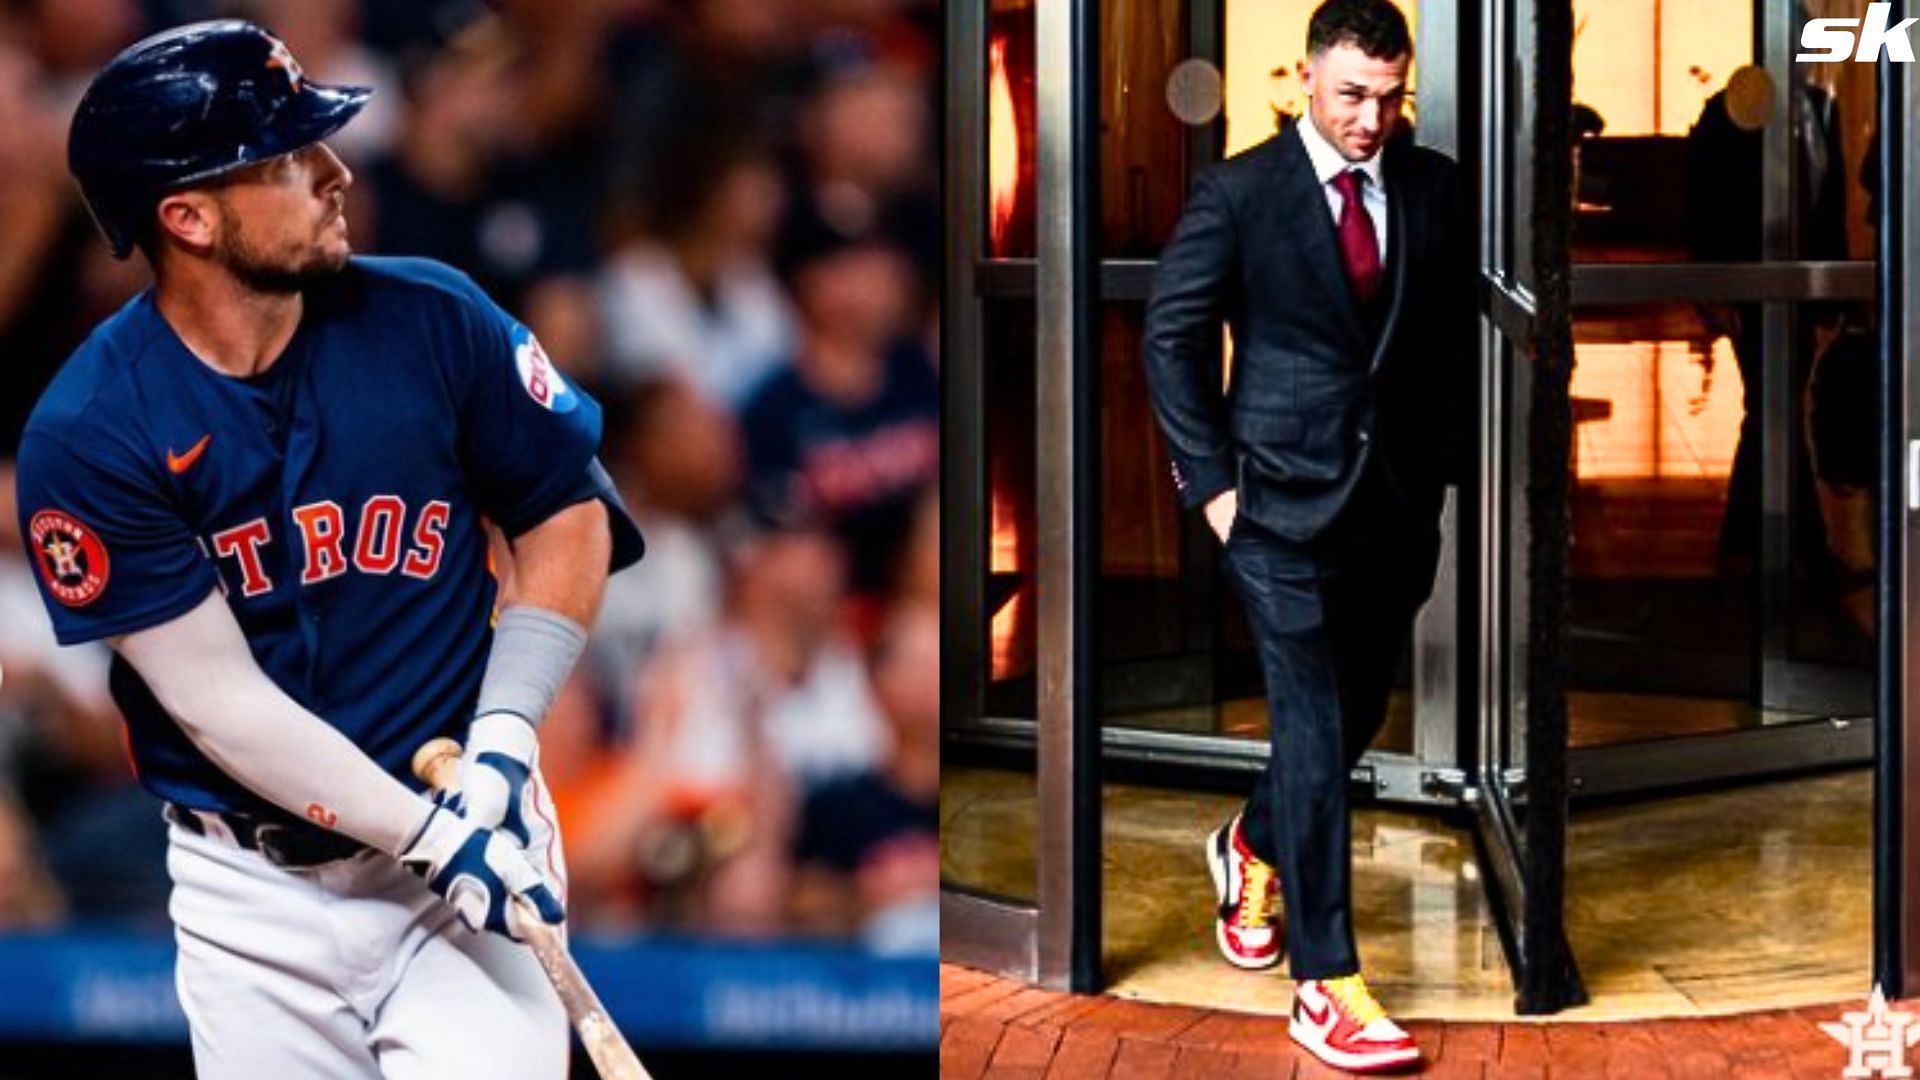 Alex Bregman defies norms for White House visit, rocks bright sneakers with dapper suit